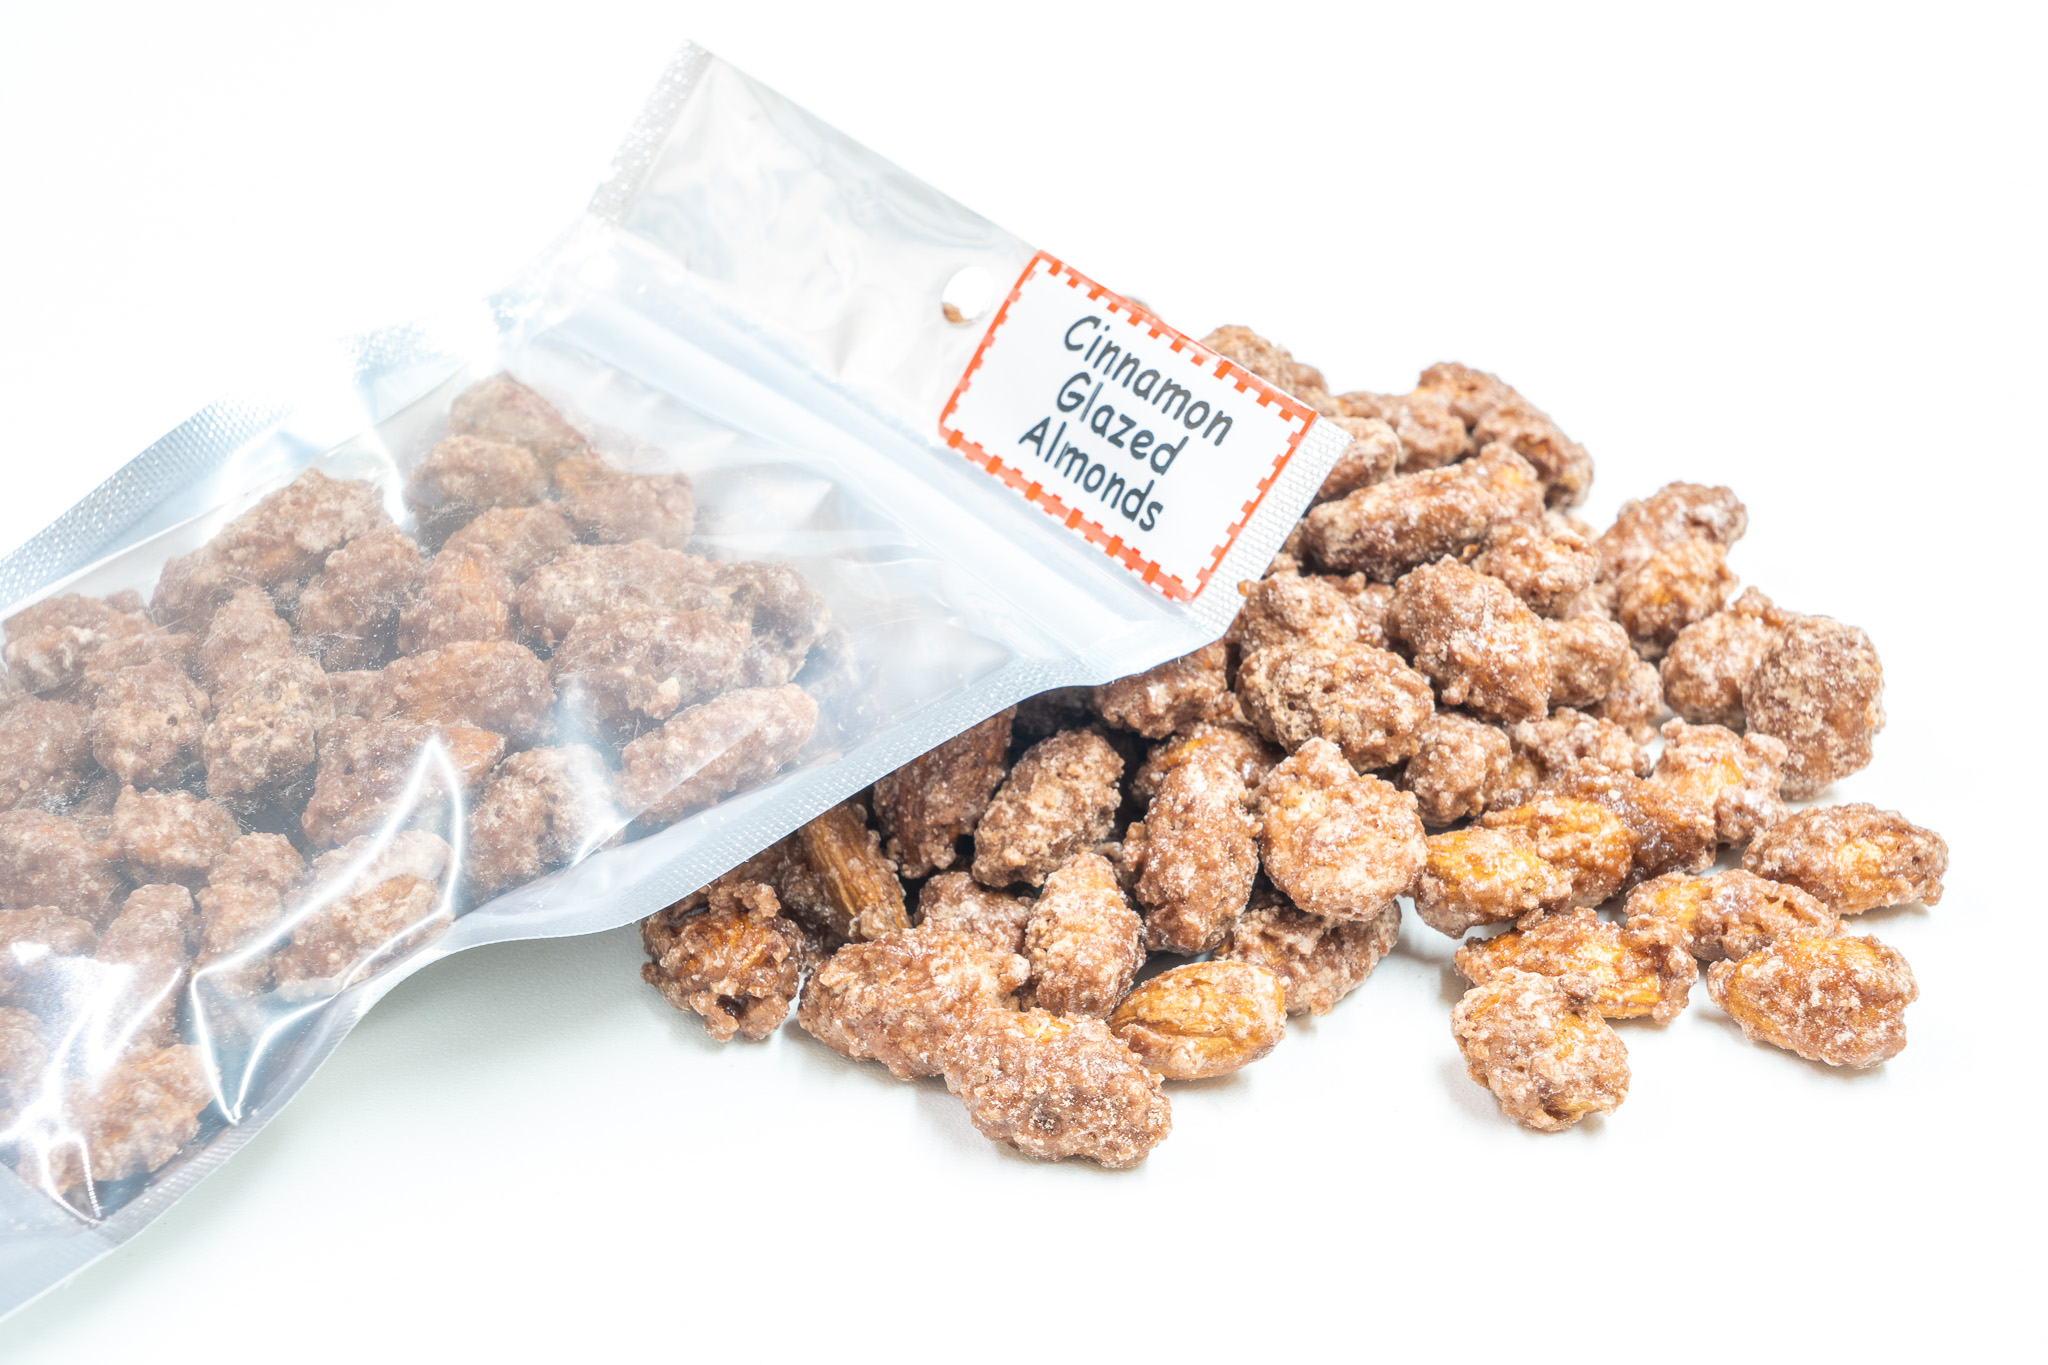 Cinnamon Glazed Almonds In and Out of Package